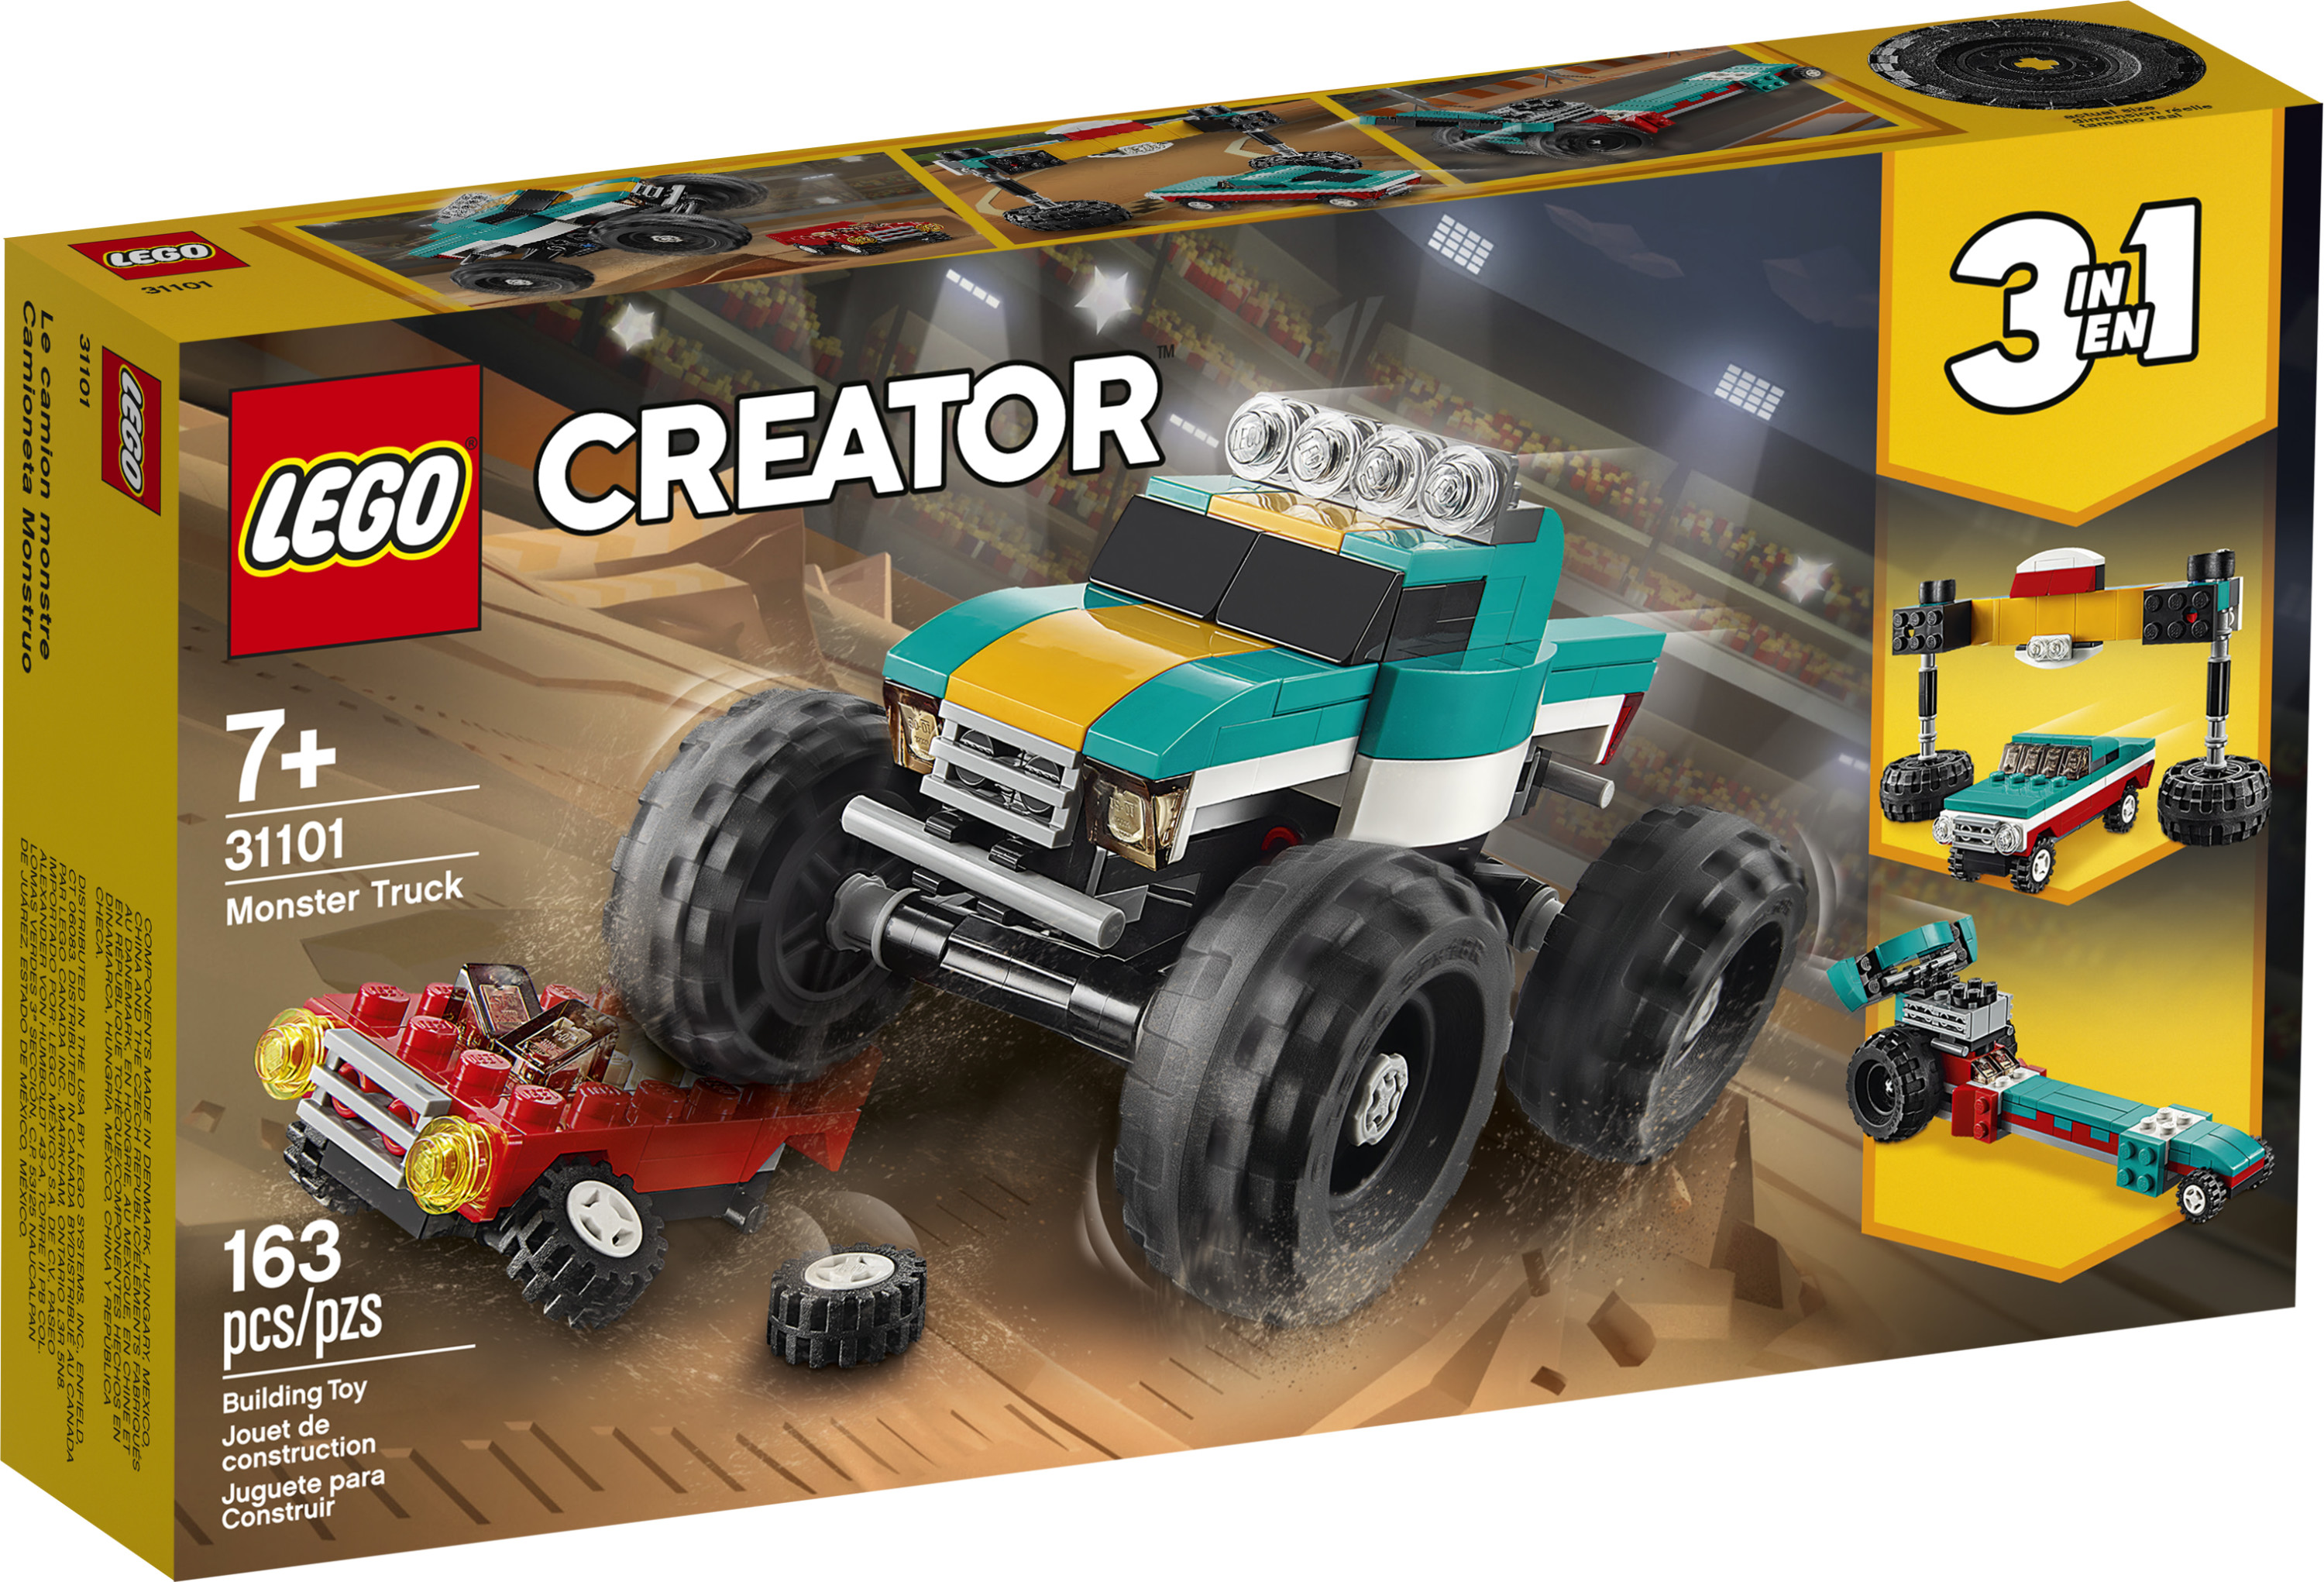 LEGO Creator 3in1 Monster Truck Toy 31101 Cool Building Kit for Kids (163 Pieces) - image 4 of 11